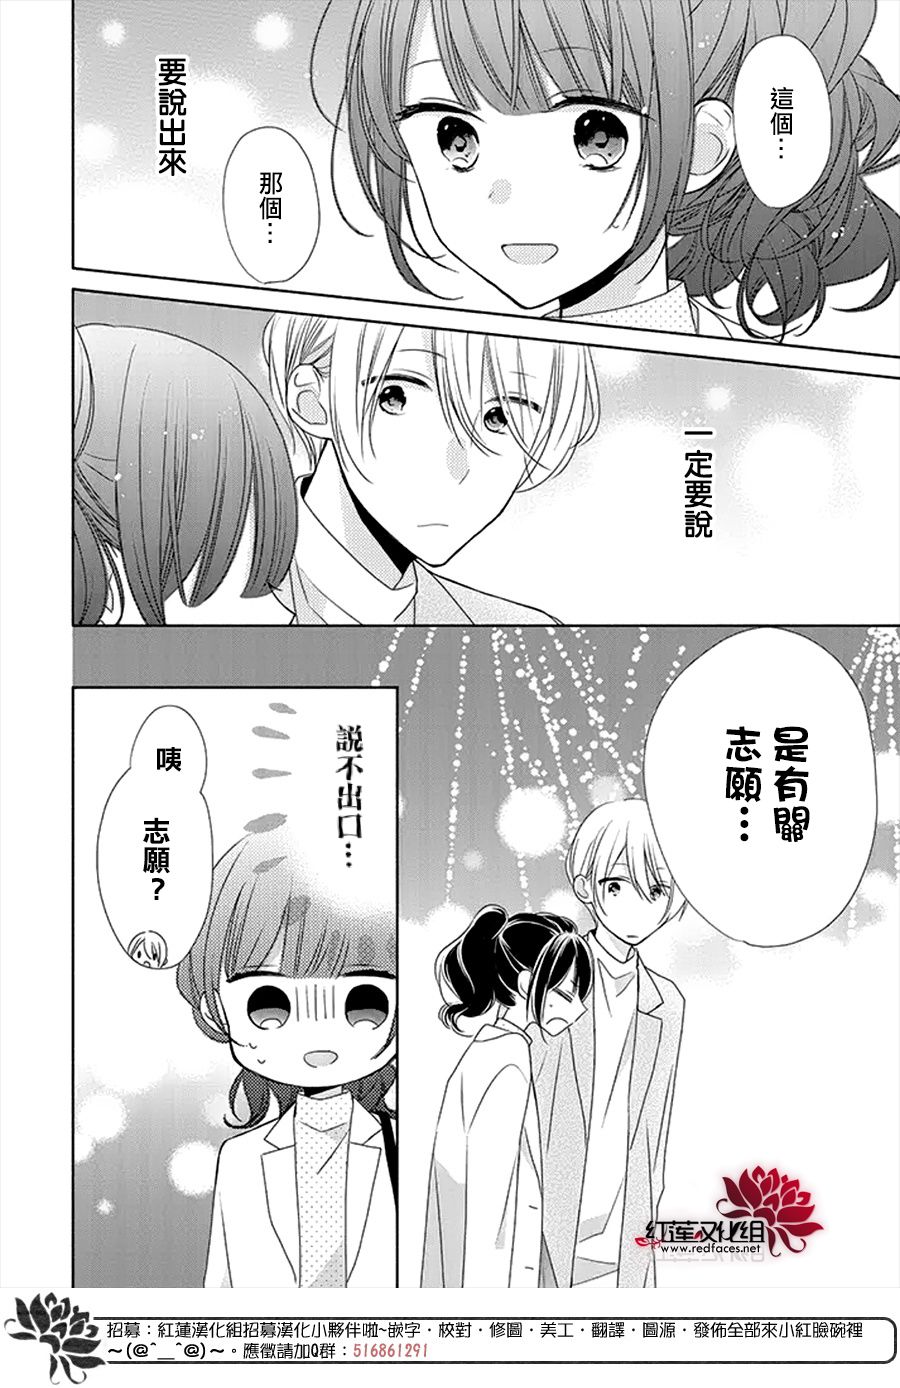 If given a second chance - 25話 - 6